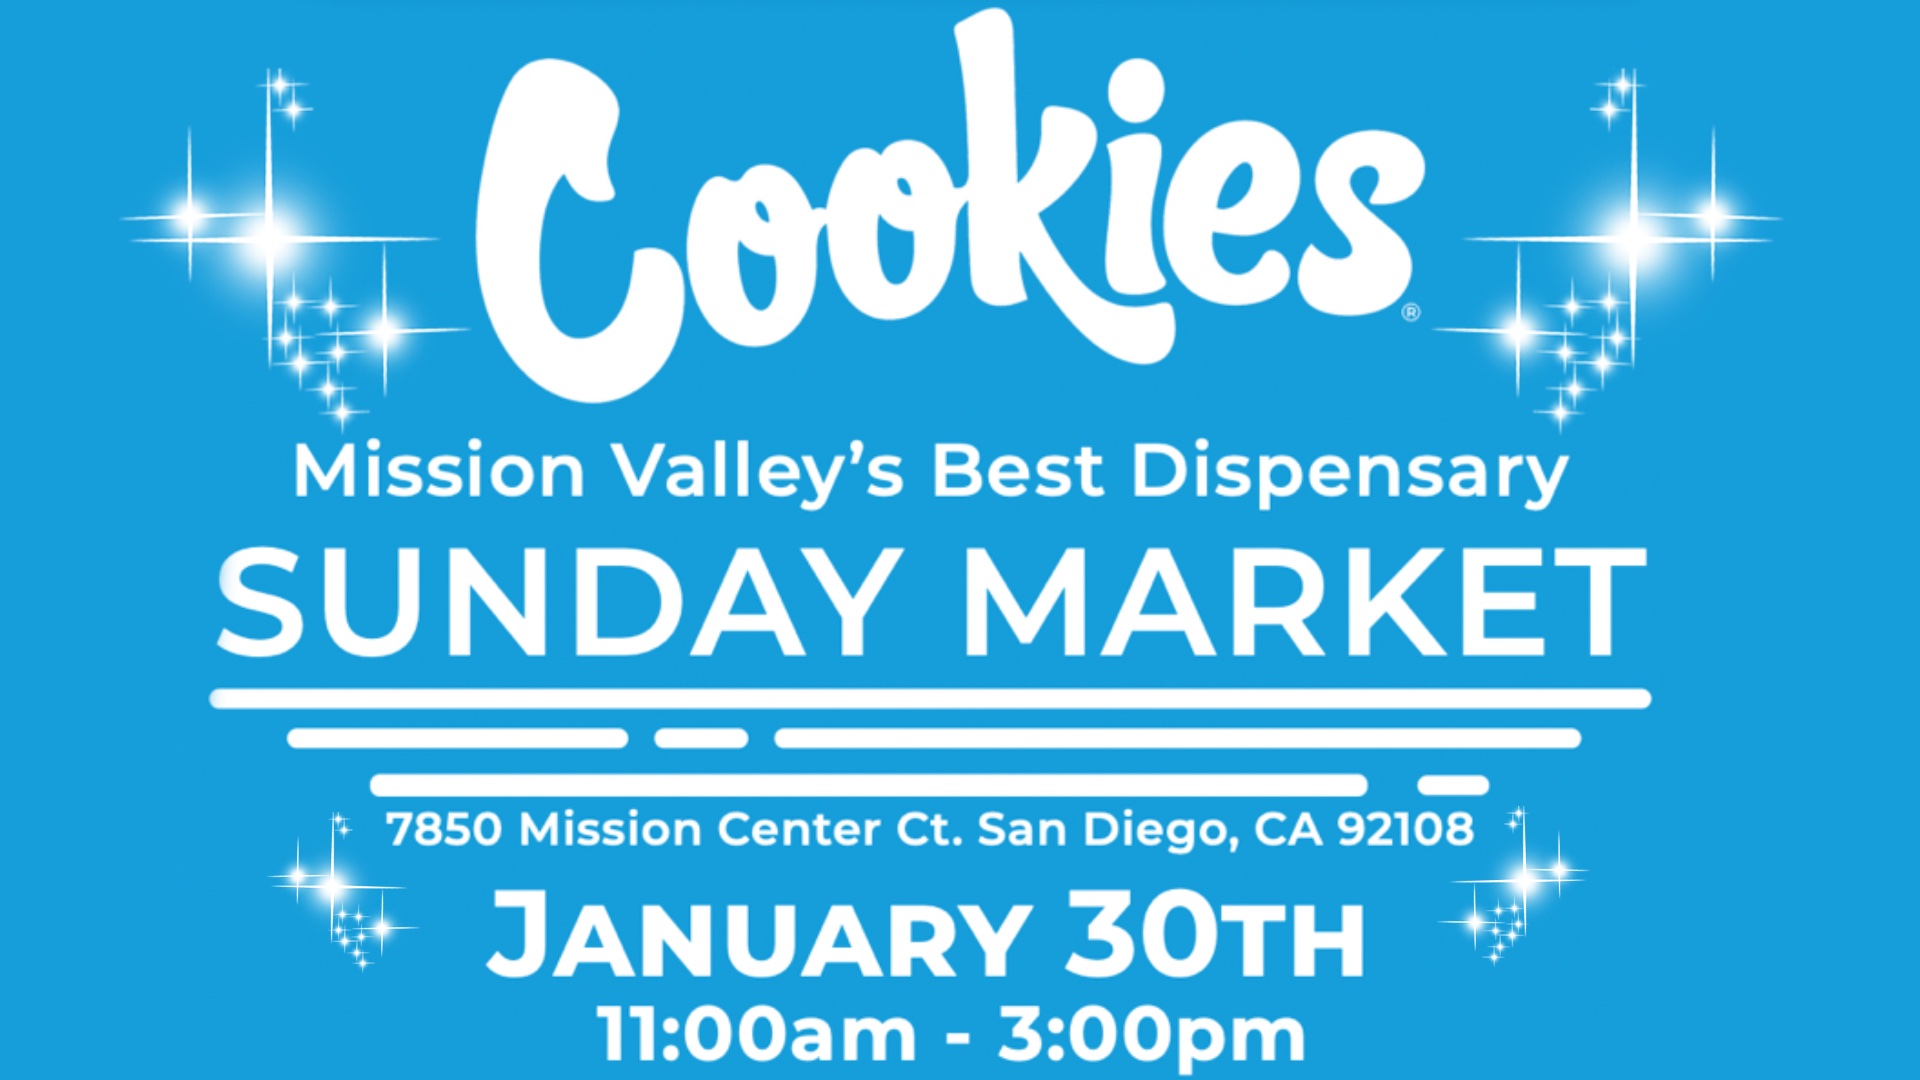 COOKIES MISSION VALLEY SUNDAY MARKET 1/30/22